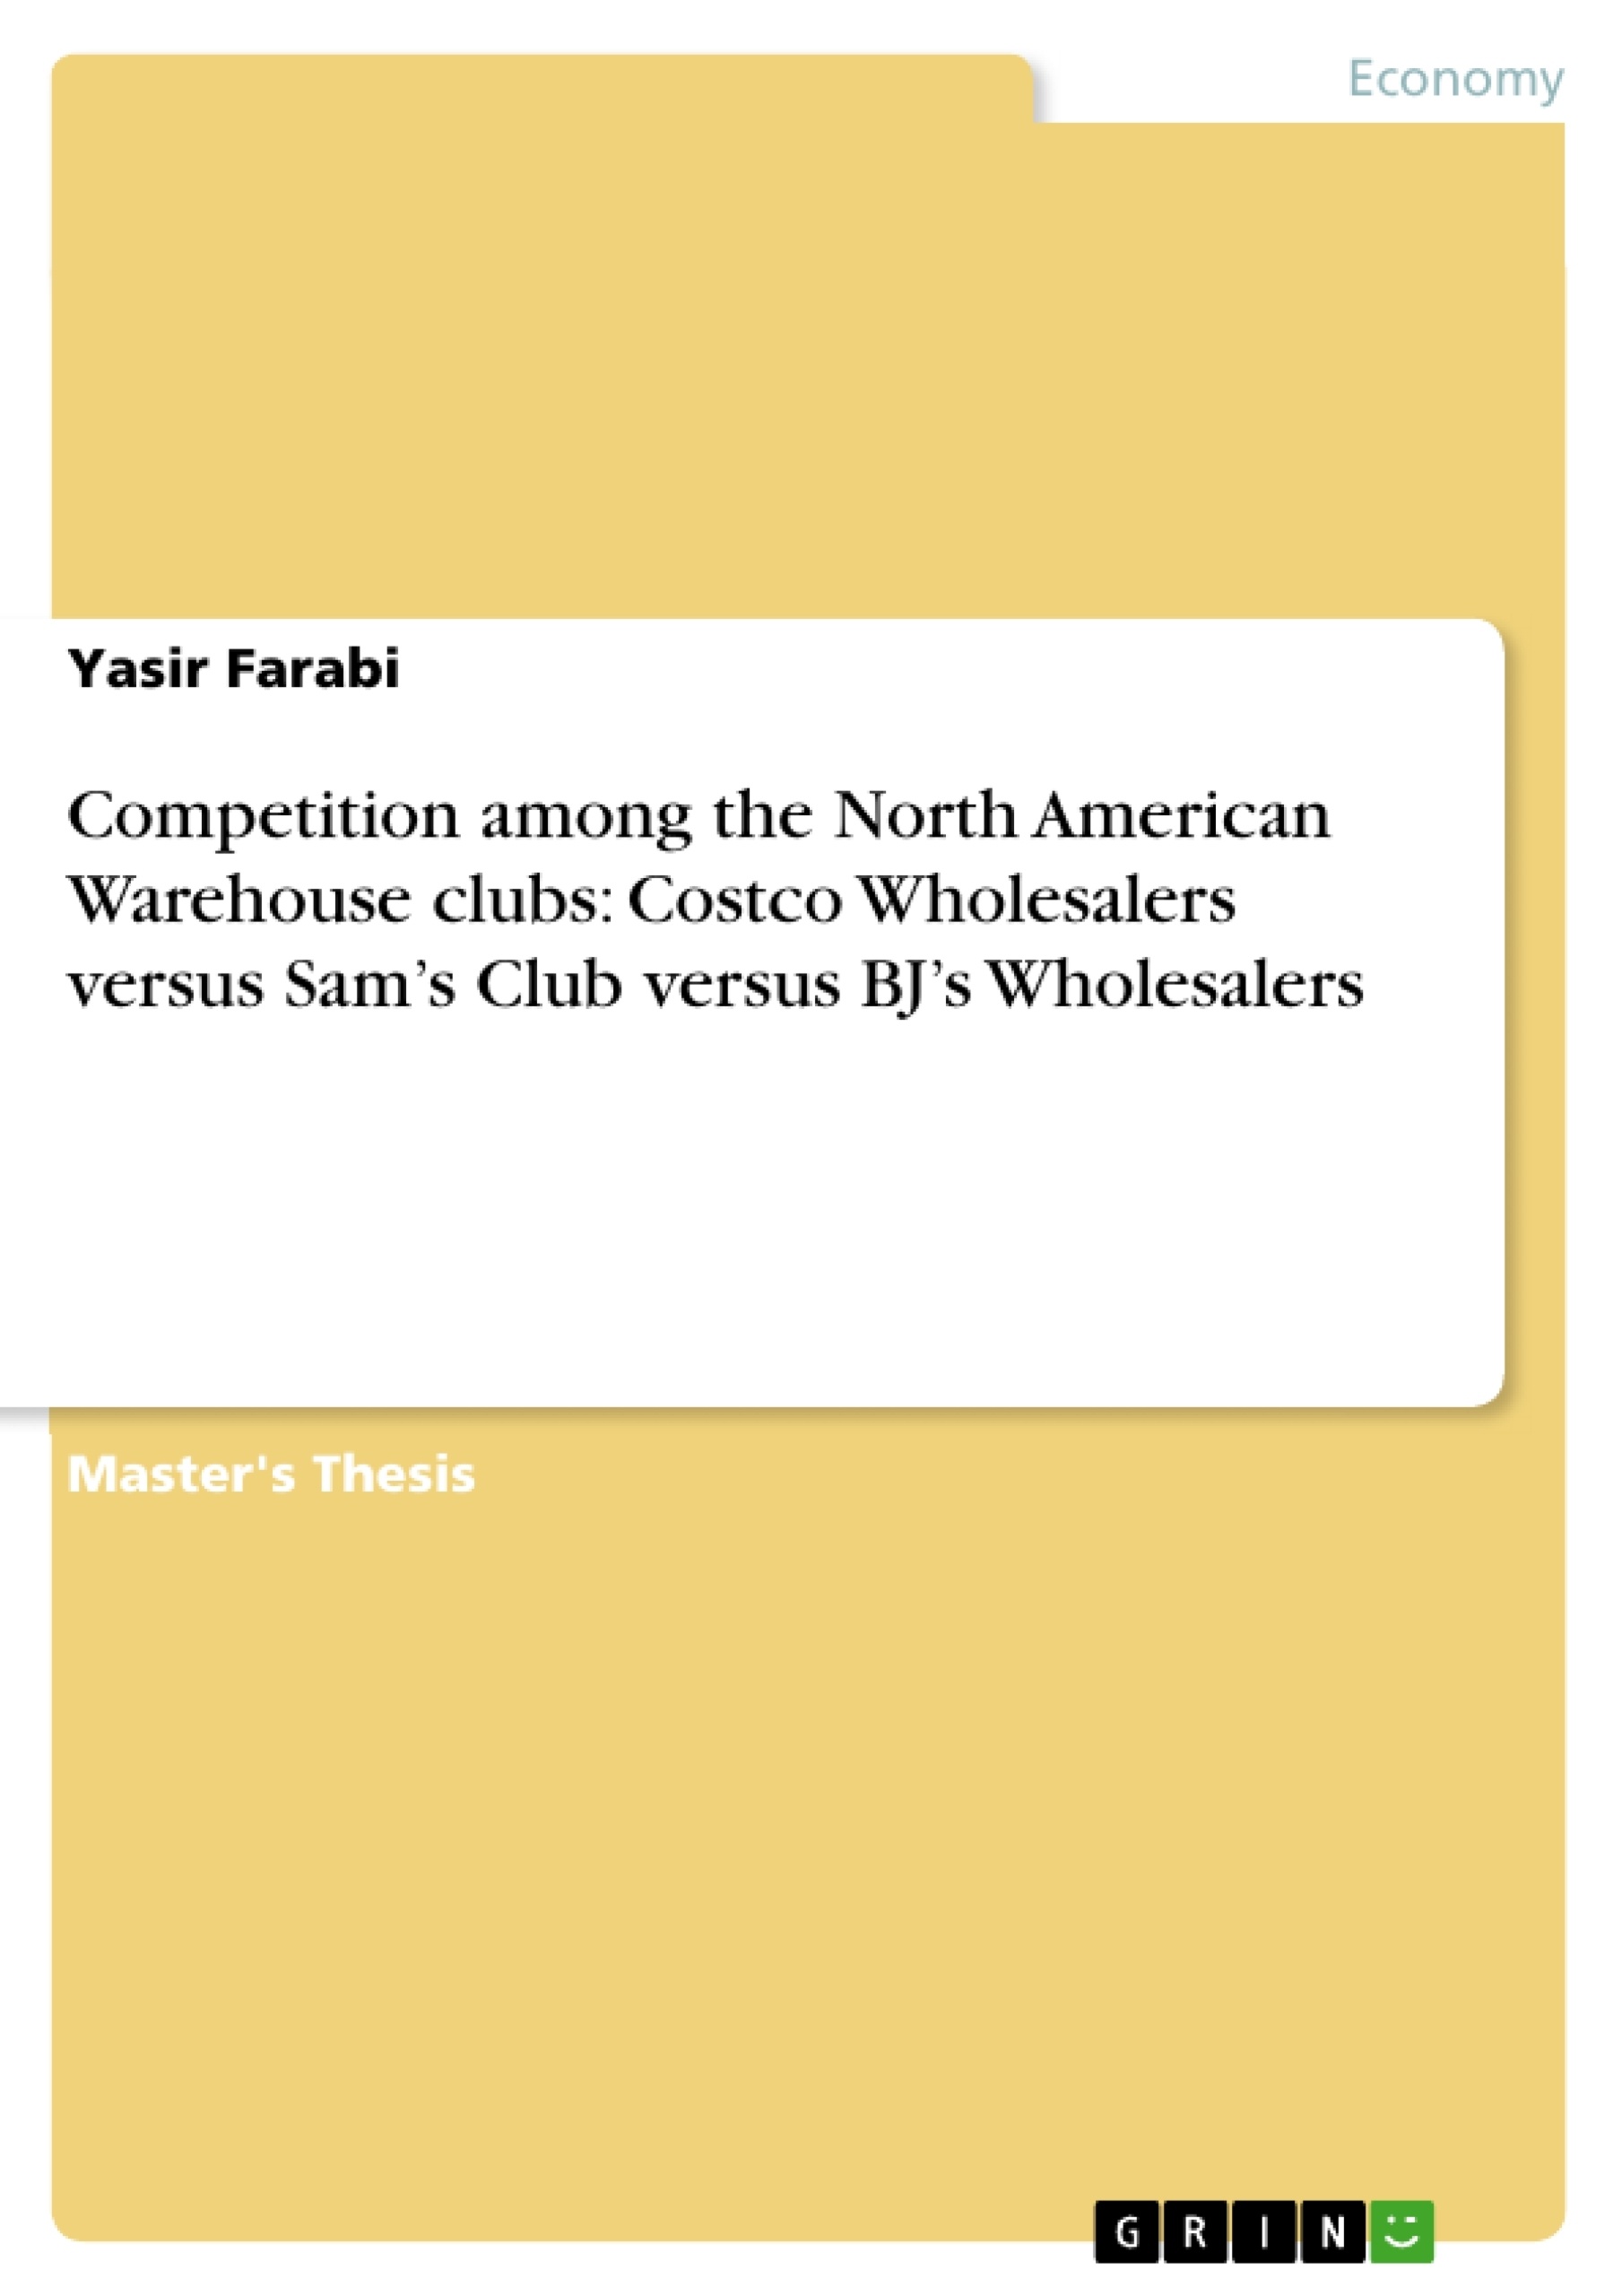 Title: Competition among the North American Warehouse clubs: Costco Wholesalers versus Sam’s Club versus BJ’s Wholesalers